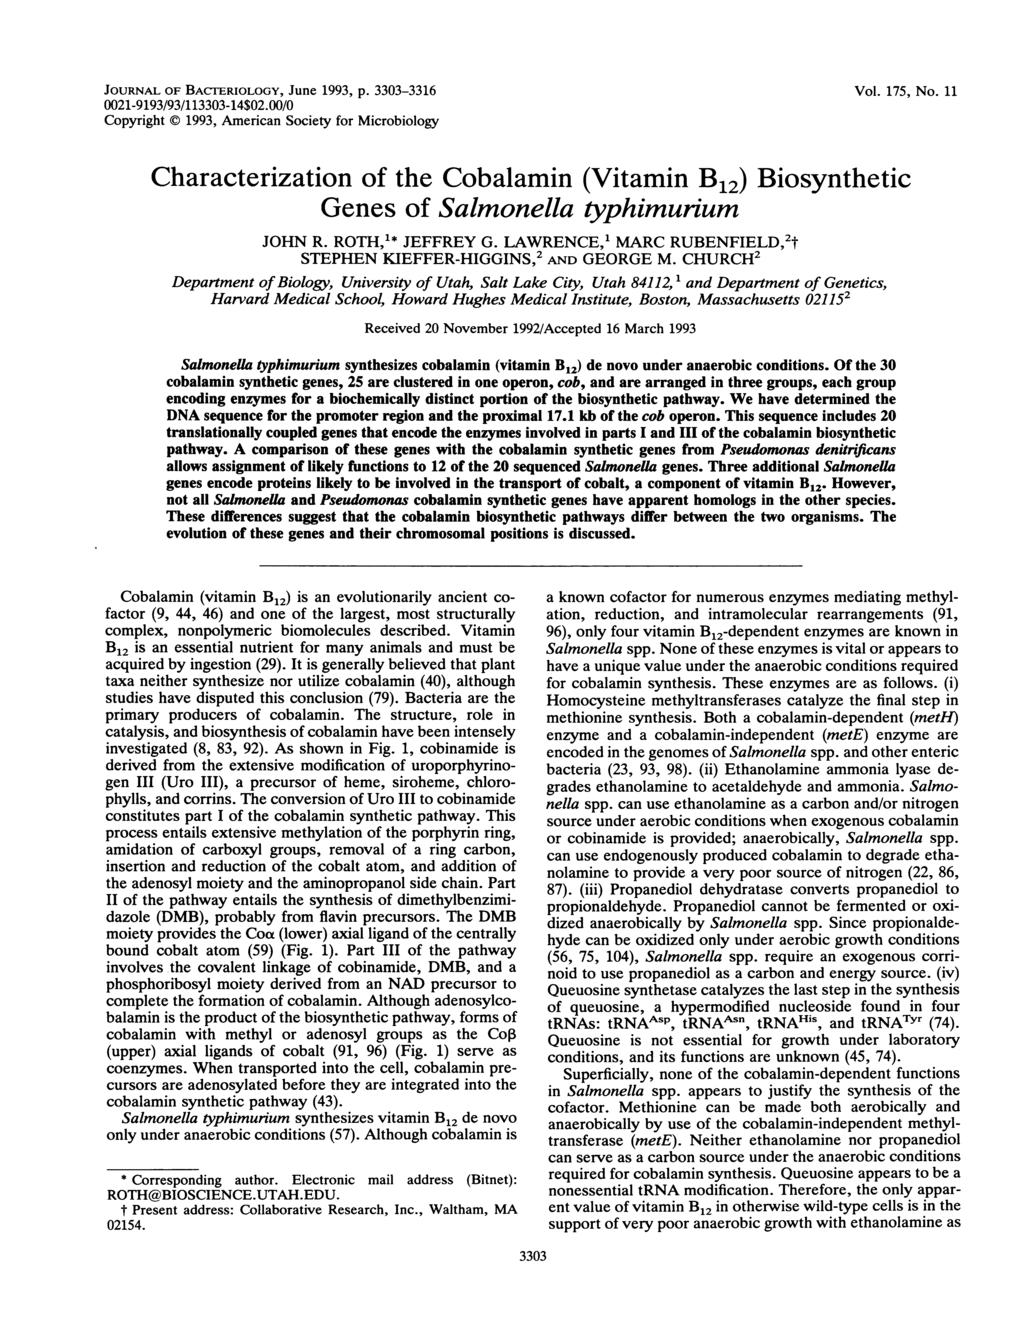 JOURNAL OF BACTERIOLOGY, June 1993, p. 3303-3316 0021-9193/93/113303-14$02.00/0 Copyright 1993, American Society for Microbiology Vol. 175, No.